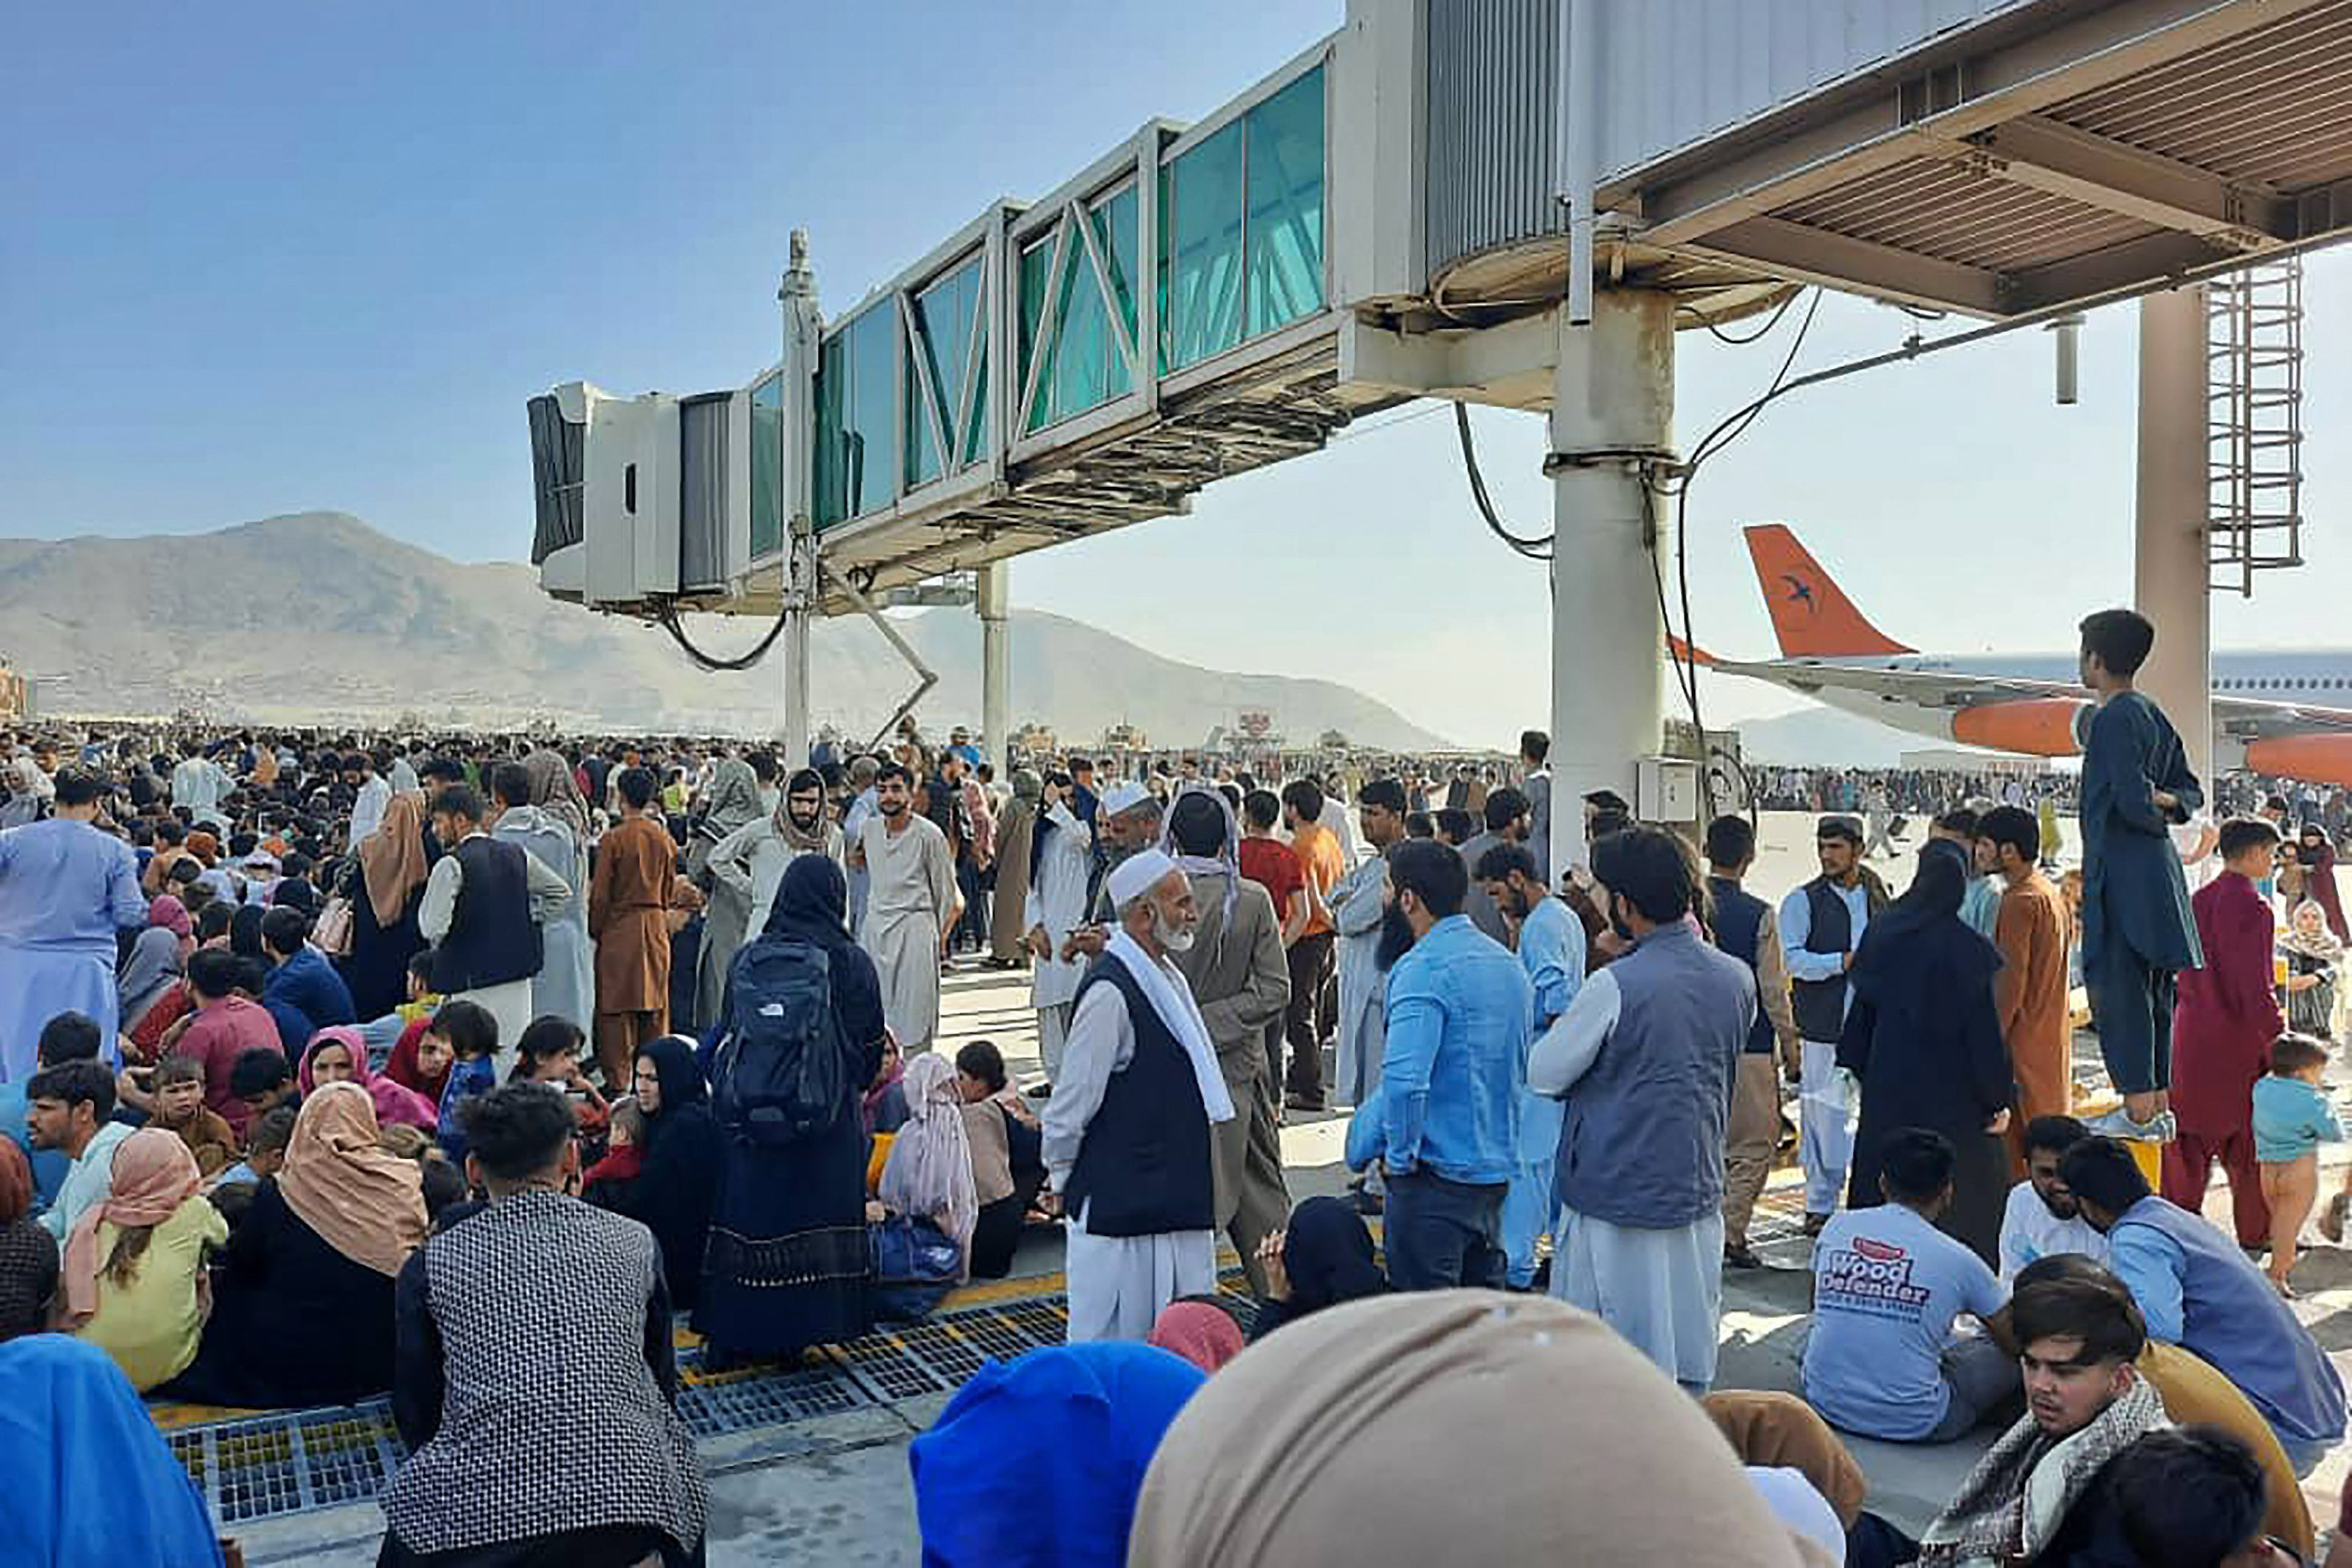 Afghans crowd at the tarmac of the Kabul airport to flee the country as the Taliban took control of Afghanistan after President Ashraf Ghani fled the country and conceded the insurgents had won the 20-year war. PHOTO: AFP